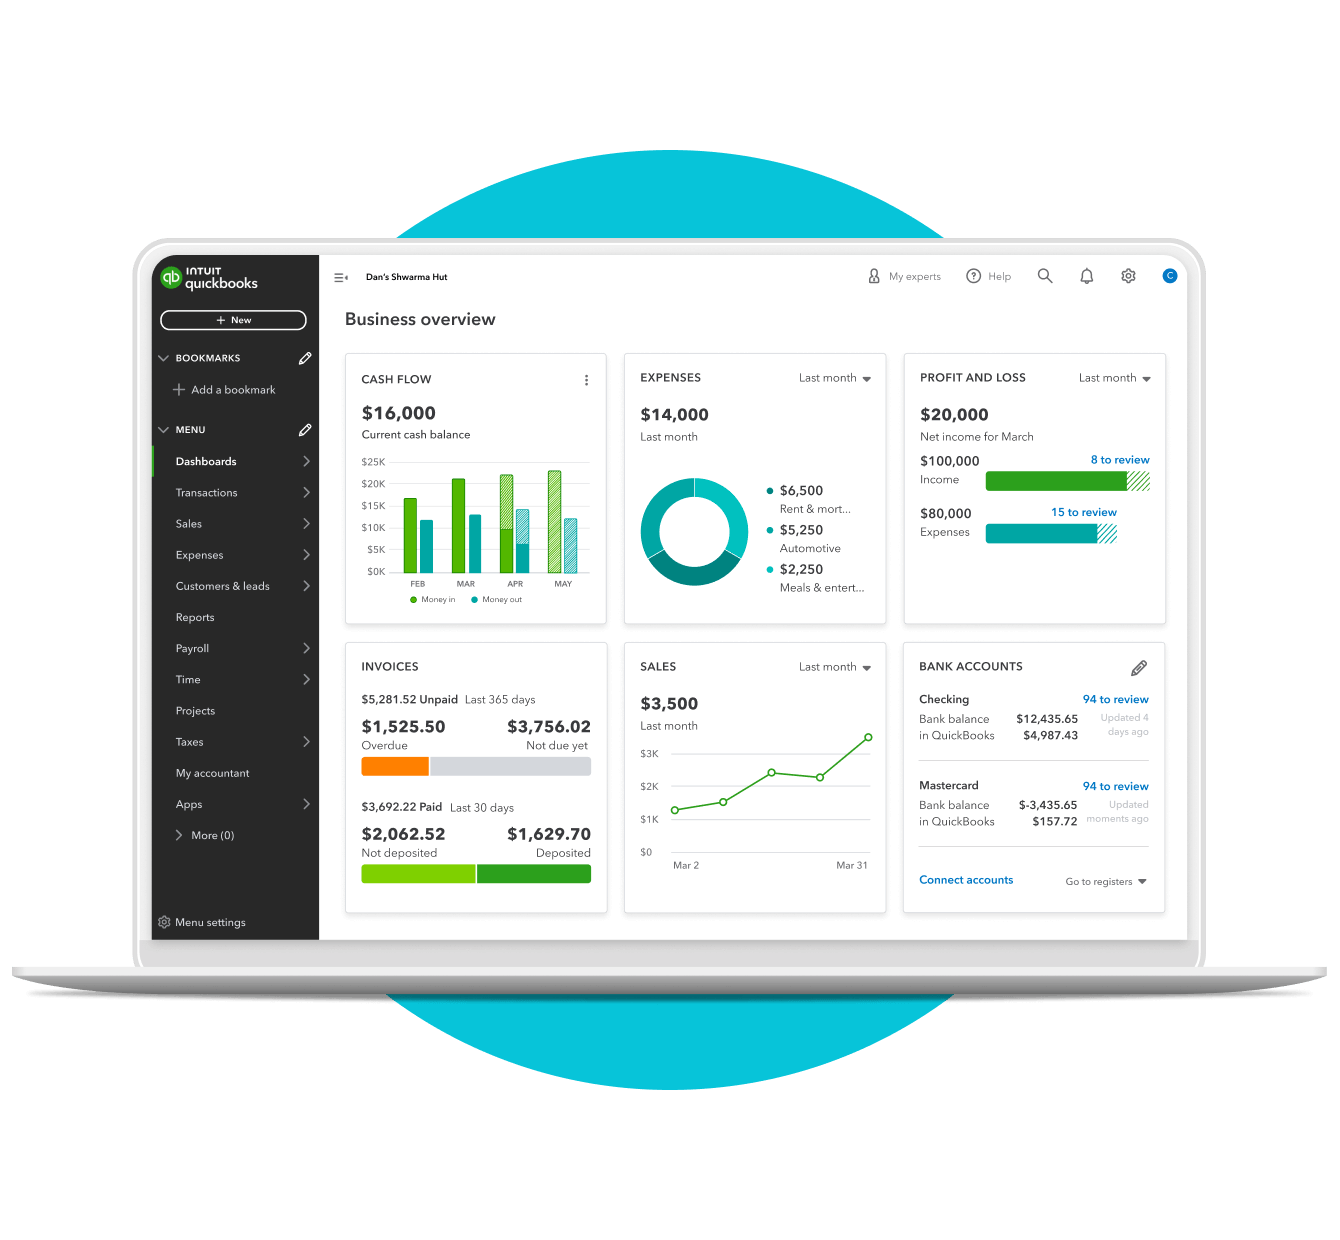 The QuickBooks dashboard showing business overview, including cash flow, expenses, profit and loss, invoices, sales, and bank accounts.